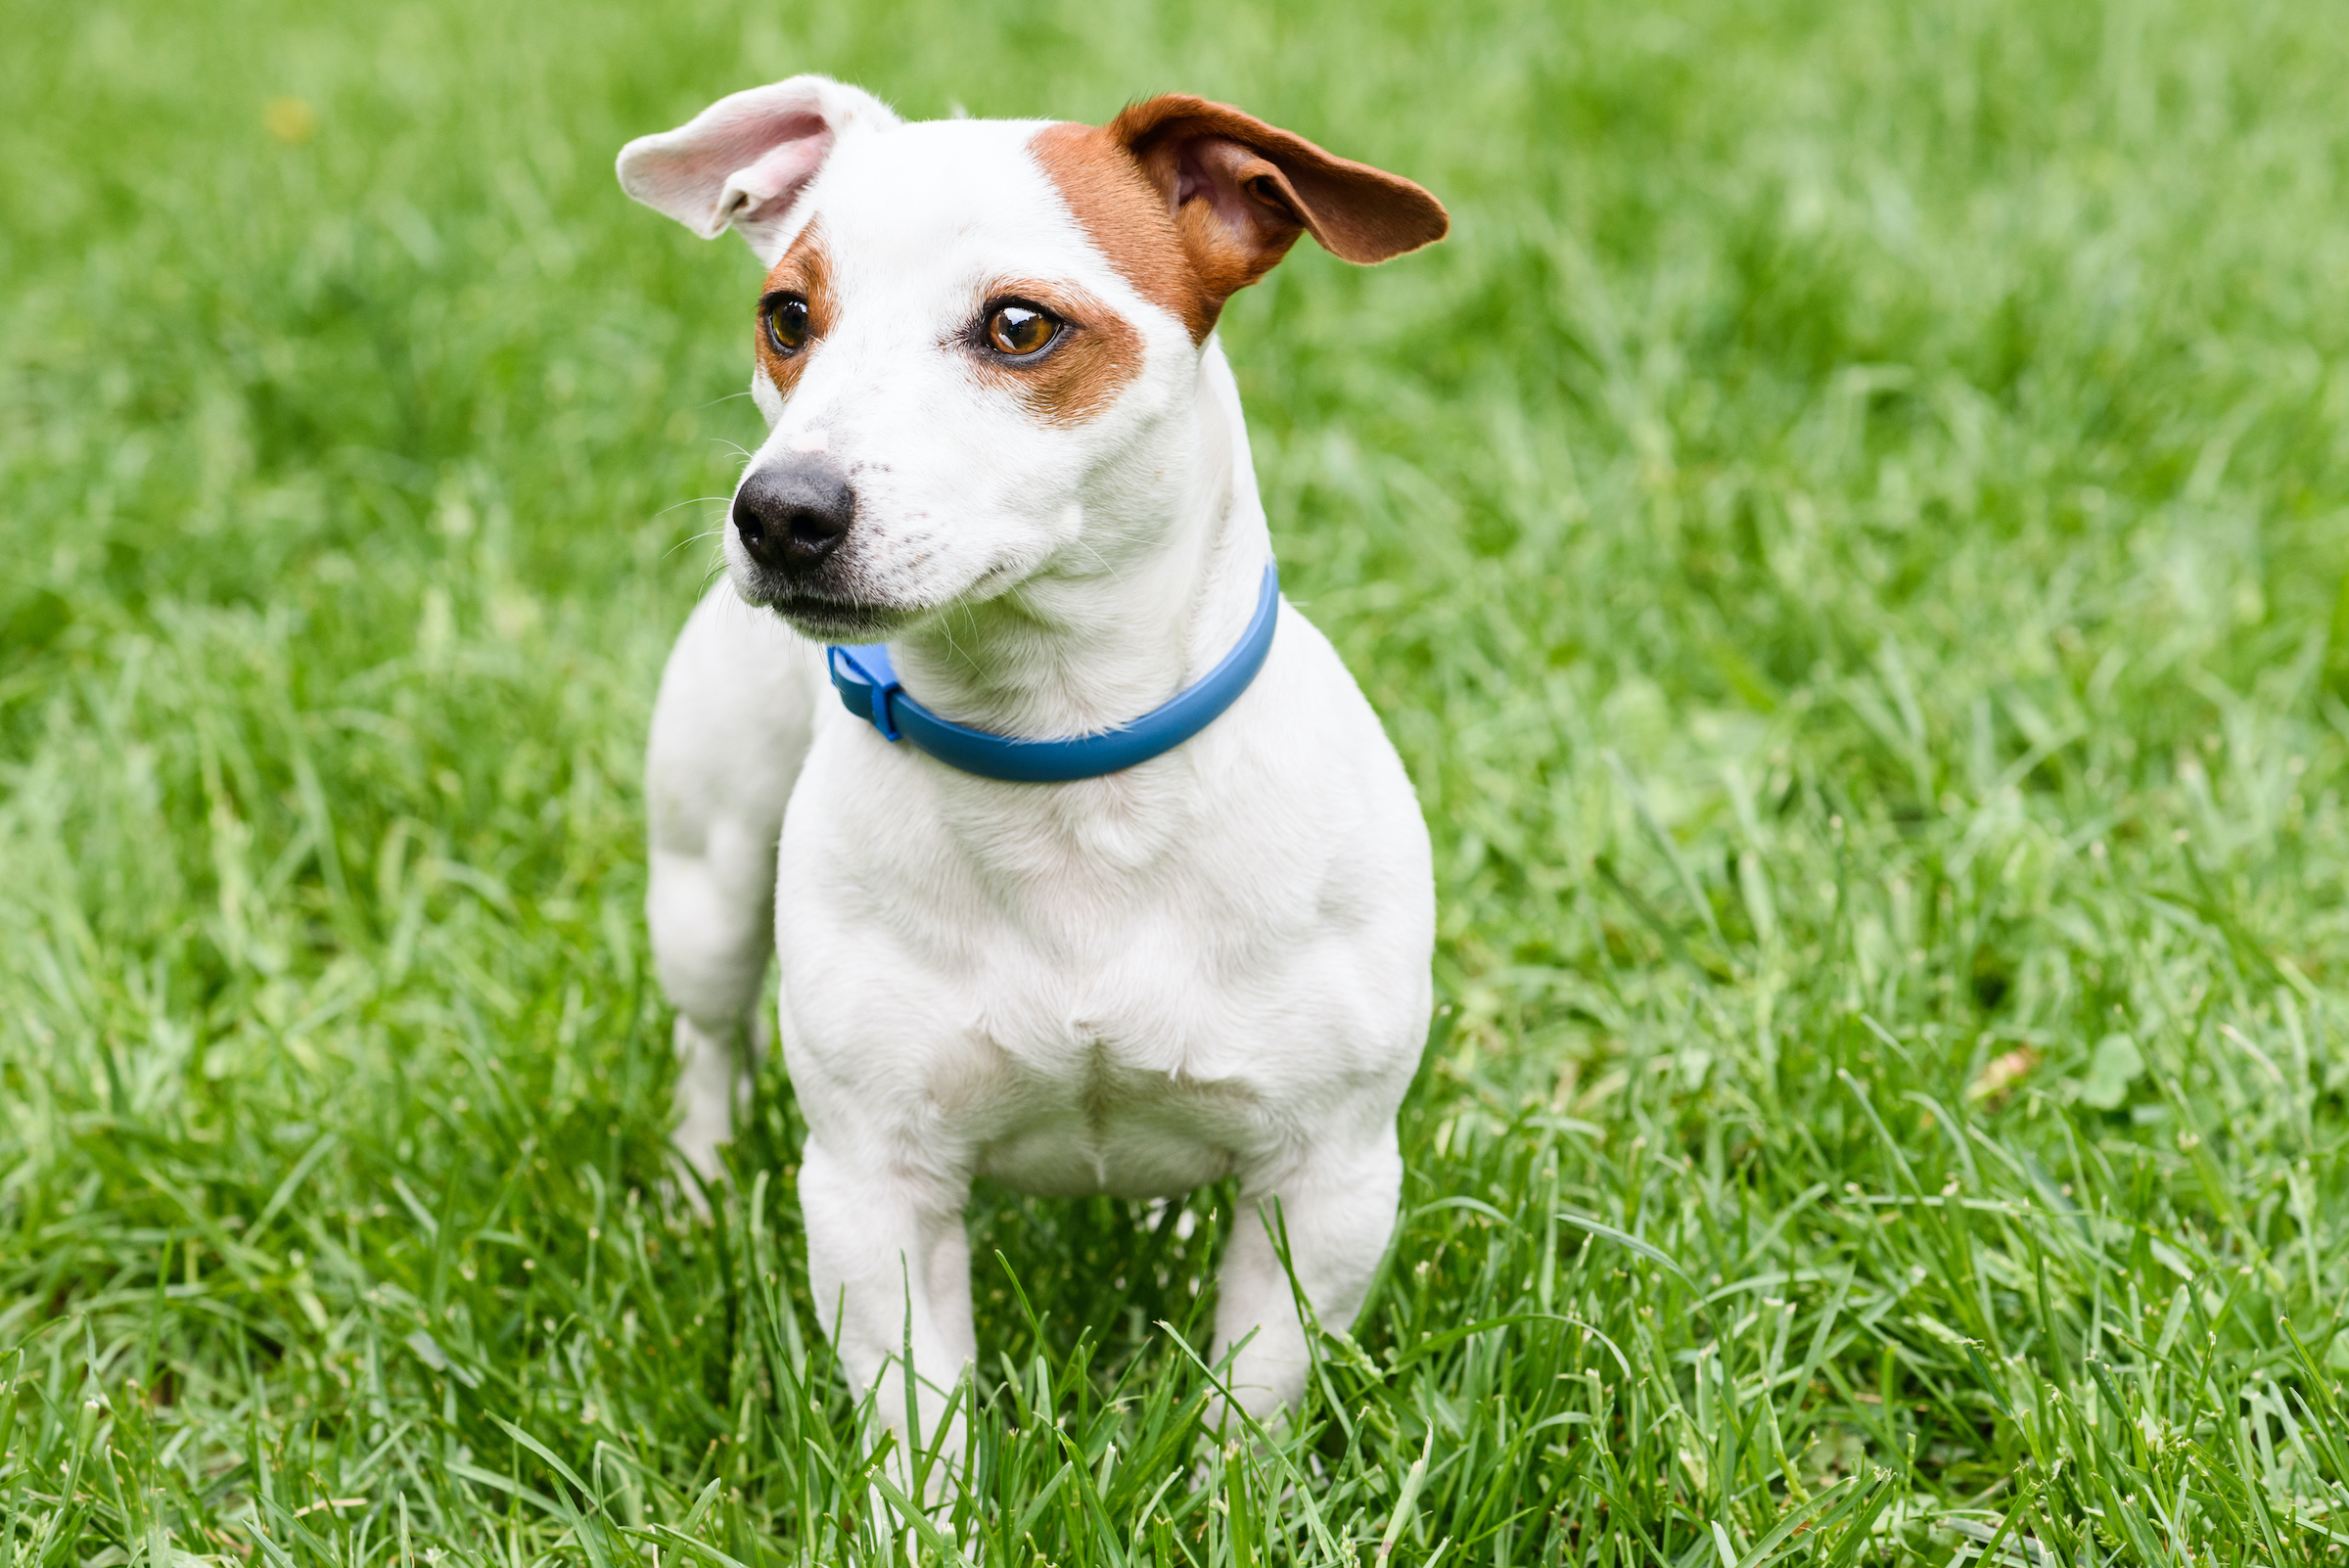 Jack russell terrier with a blue flea collar stands in the grass